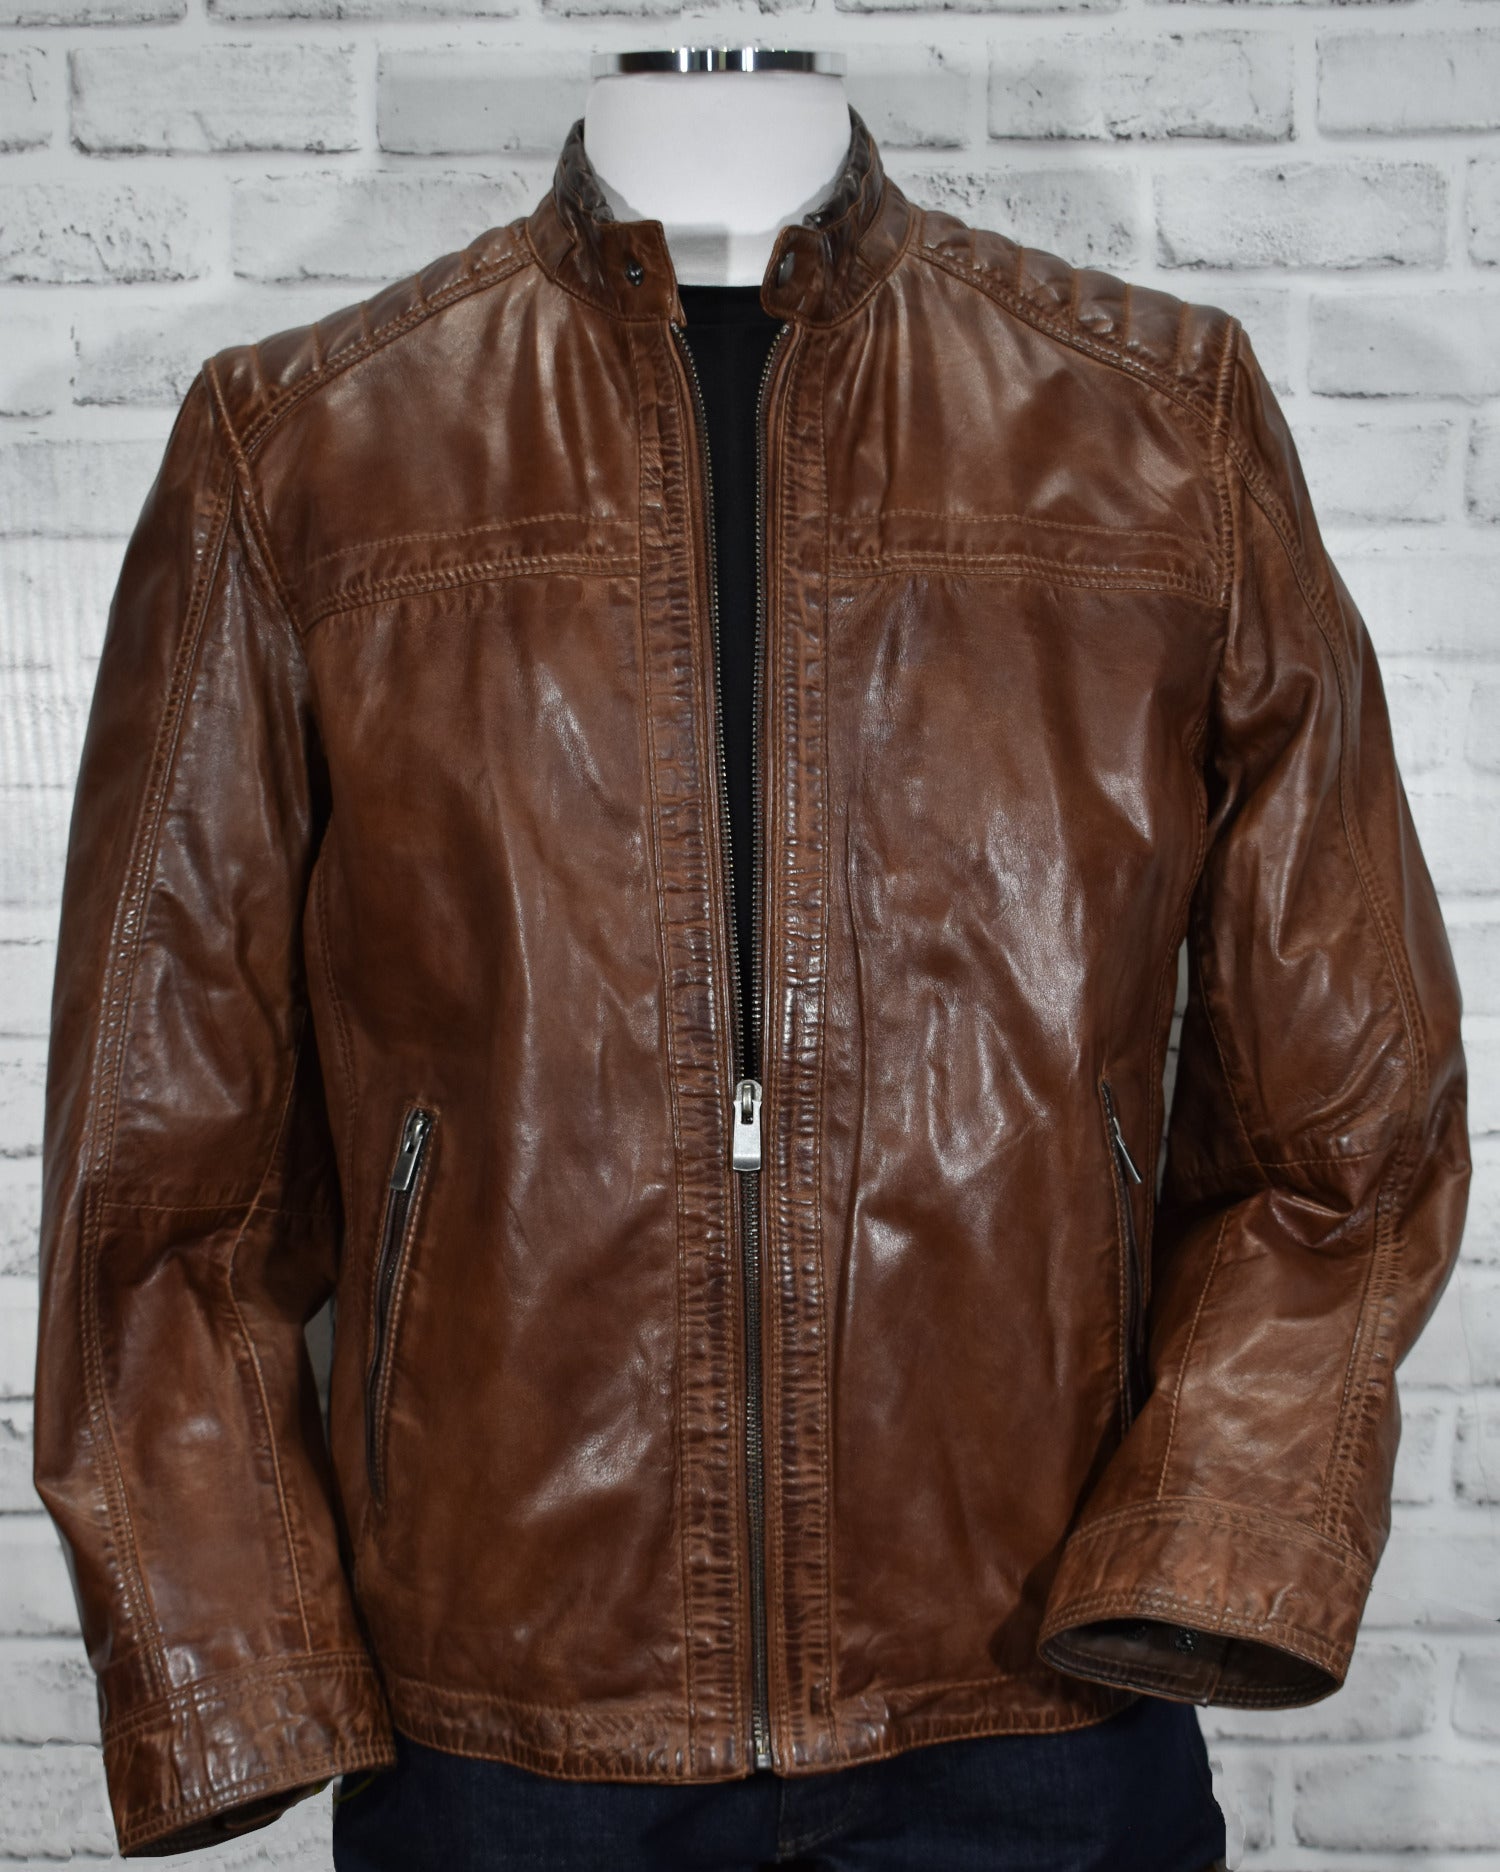 Look smart wearing this tobacco-colored leather bomber jacket. Crafted from soft, washed leather, this classic piece features cool stand-up baseball-style collar, cross-stitch shoulder detailing and open sleeves and bottom for a timeless look. Soft-lined with classic pockets, this bomber jacket offers a classic fit and feel.